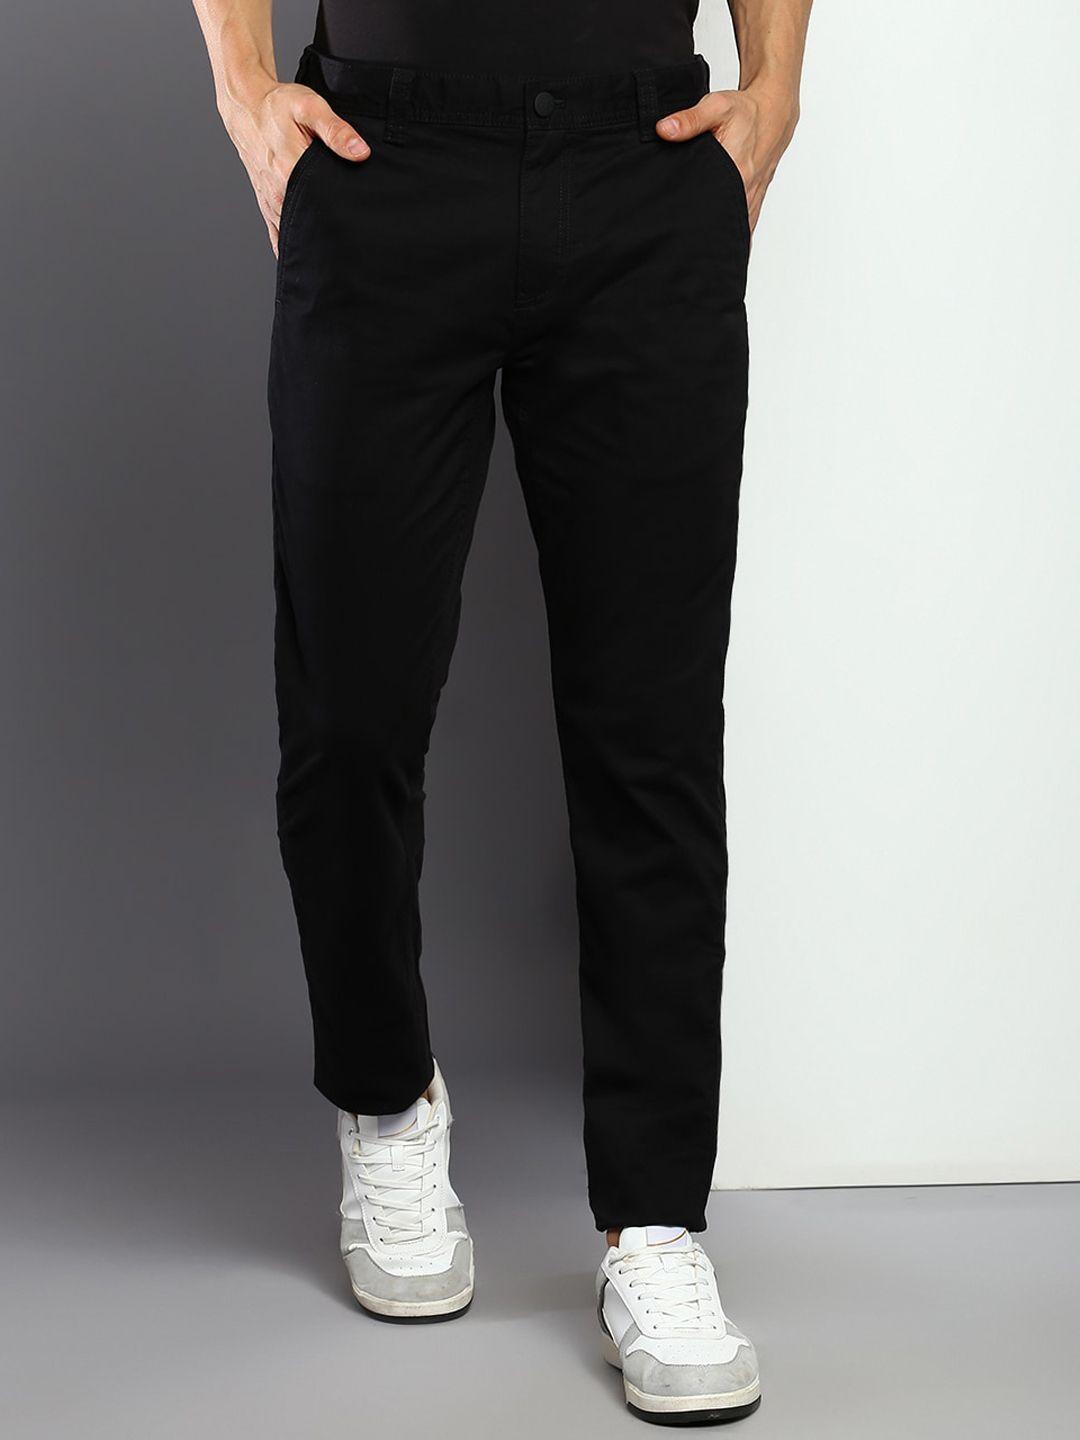 calvin klein jeans men skinny fit cotton chinos trousers